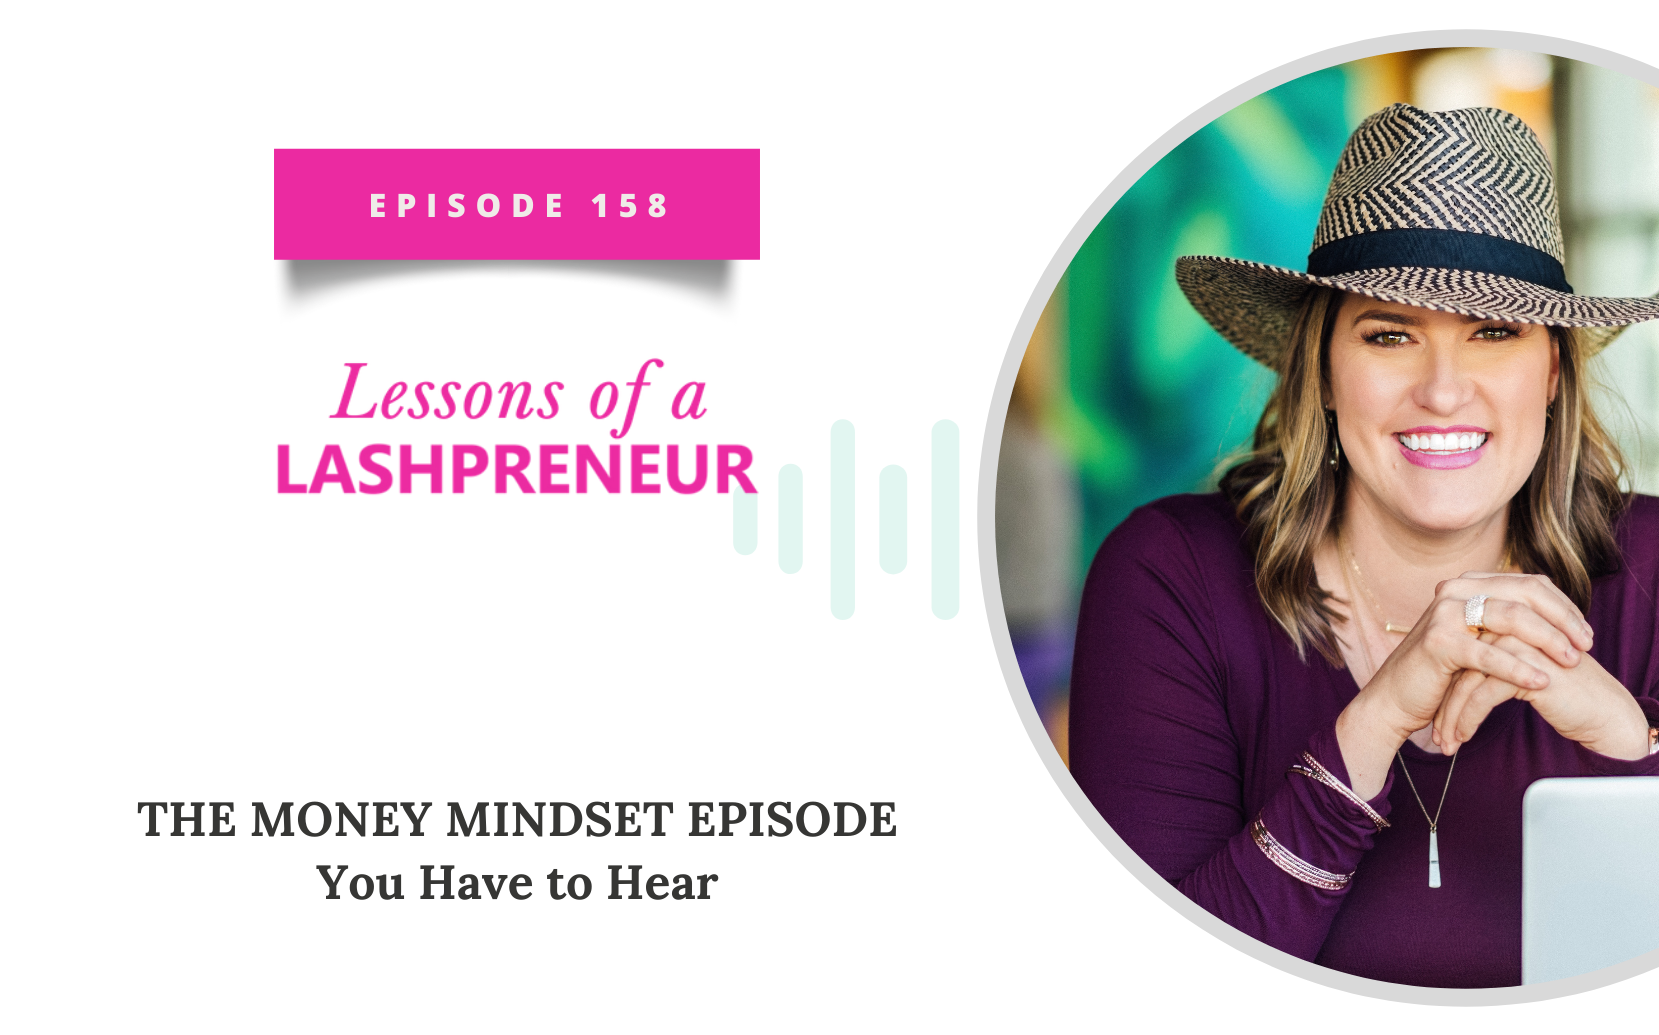 The Money Mindset Episode You Have to Hear